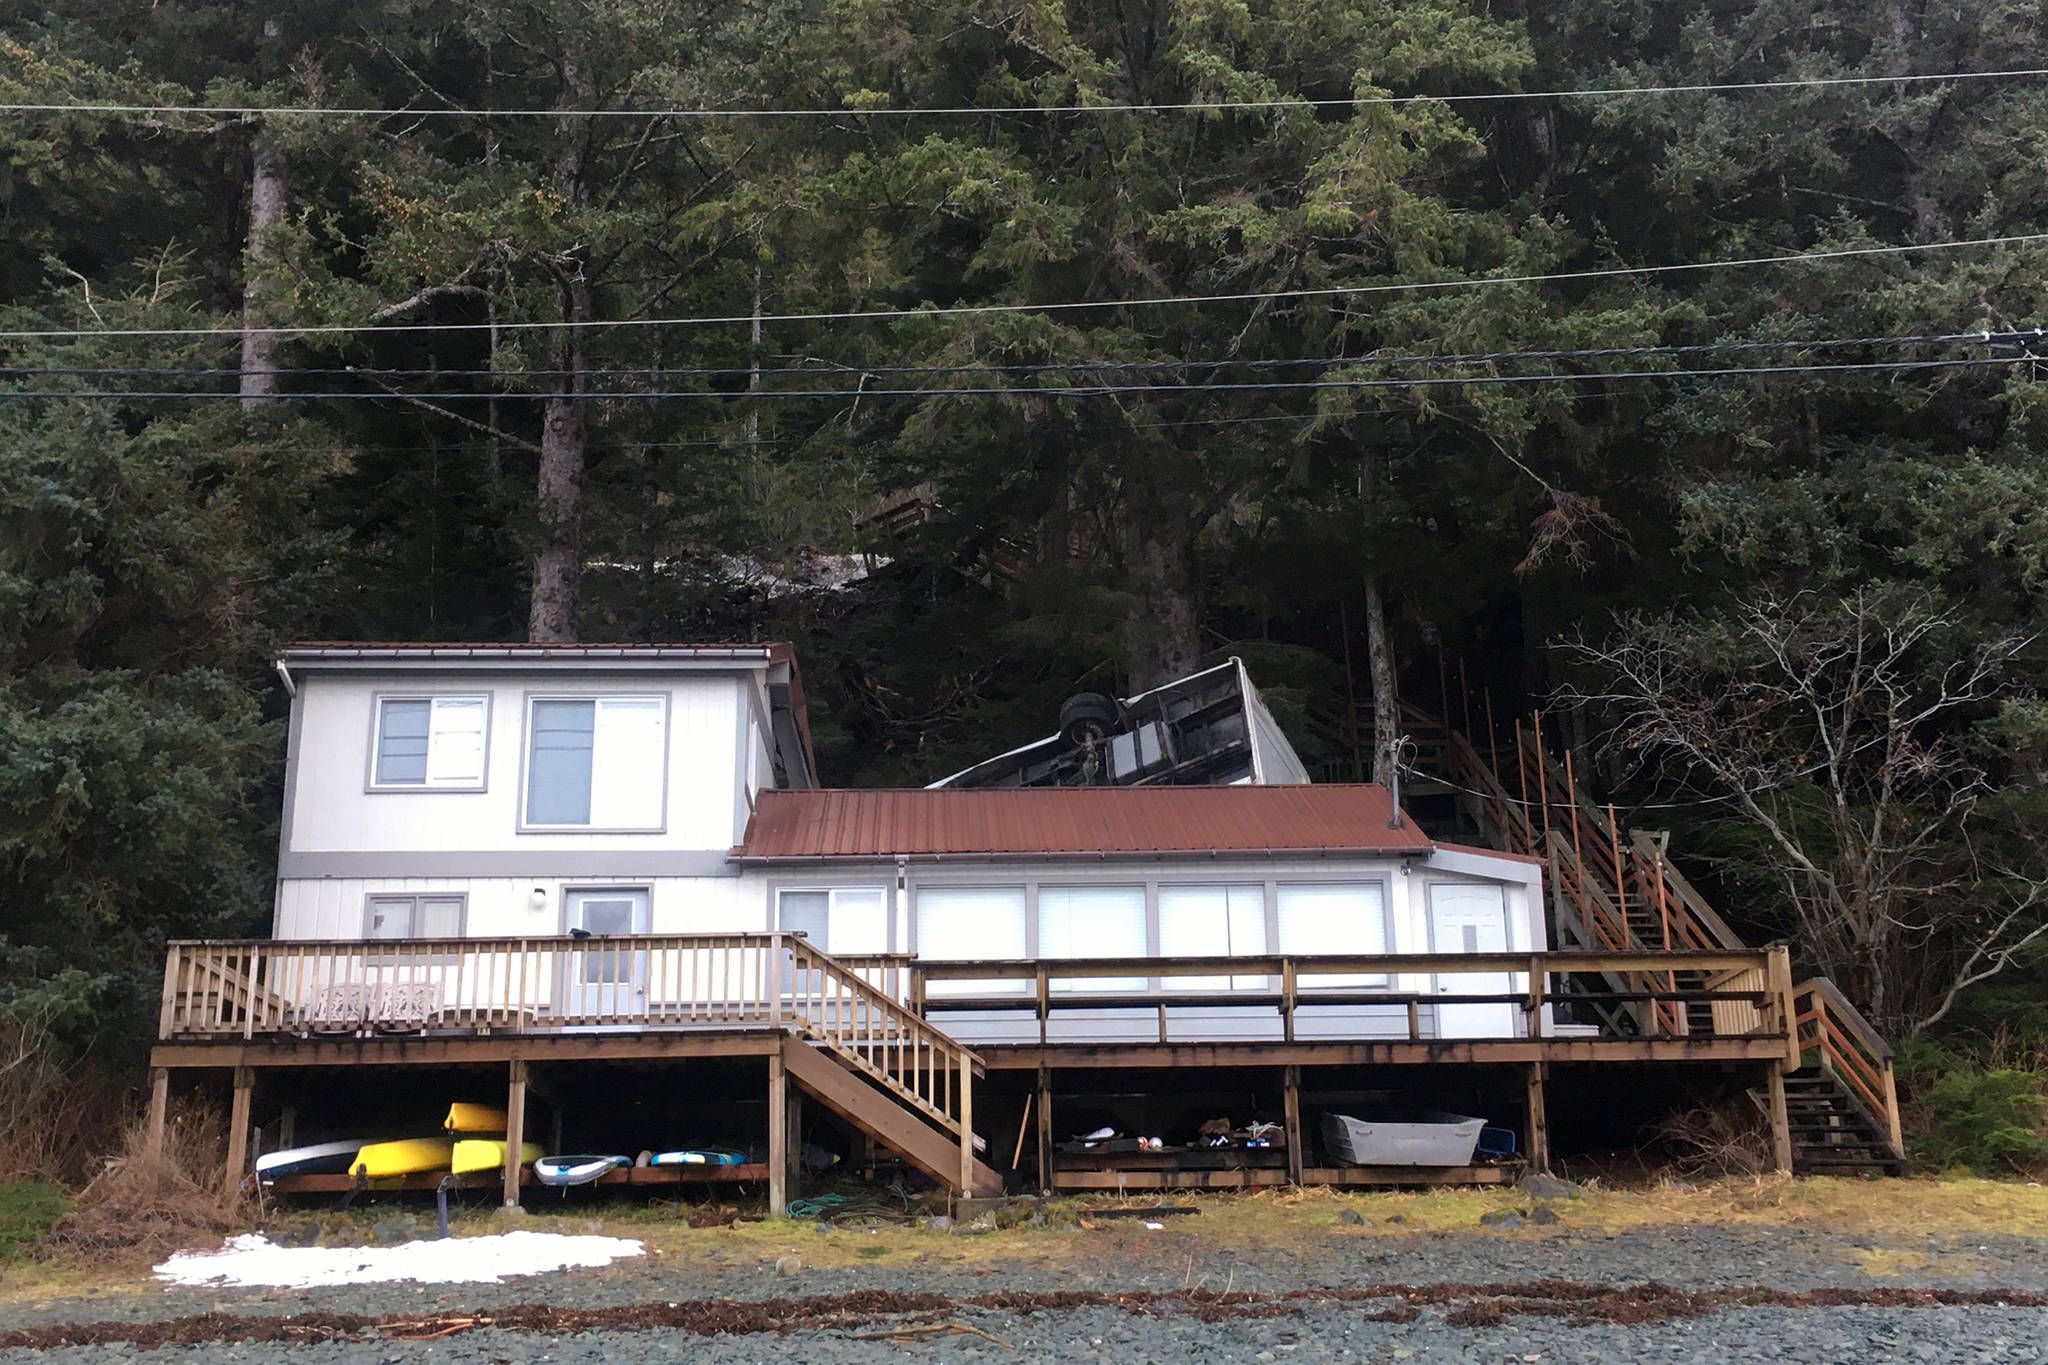 A bus landed on the roof of a house out the road after driving off the road on Nov. 26, 2020. The bus and house were empty, and the driver of the bus was uninjured. (Michael S. Lockett / Juneau Empire)